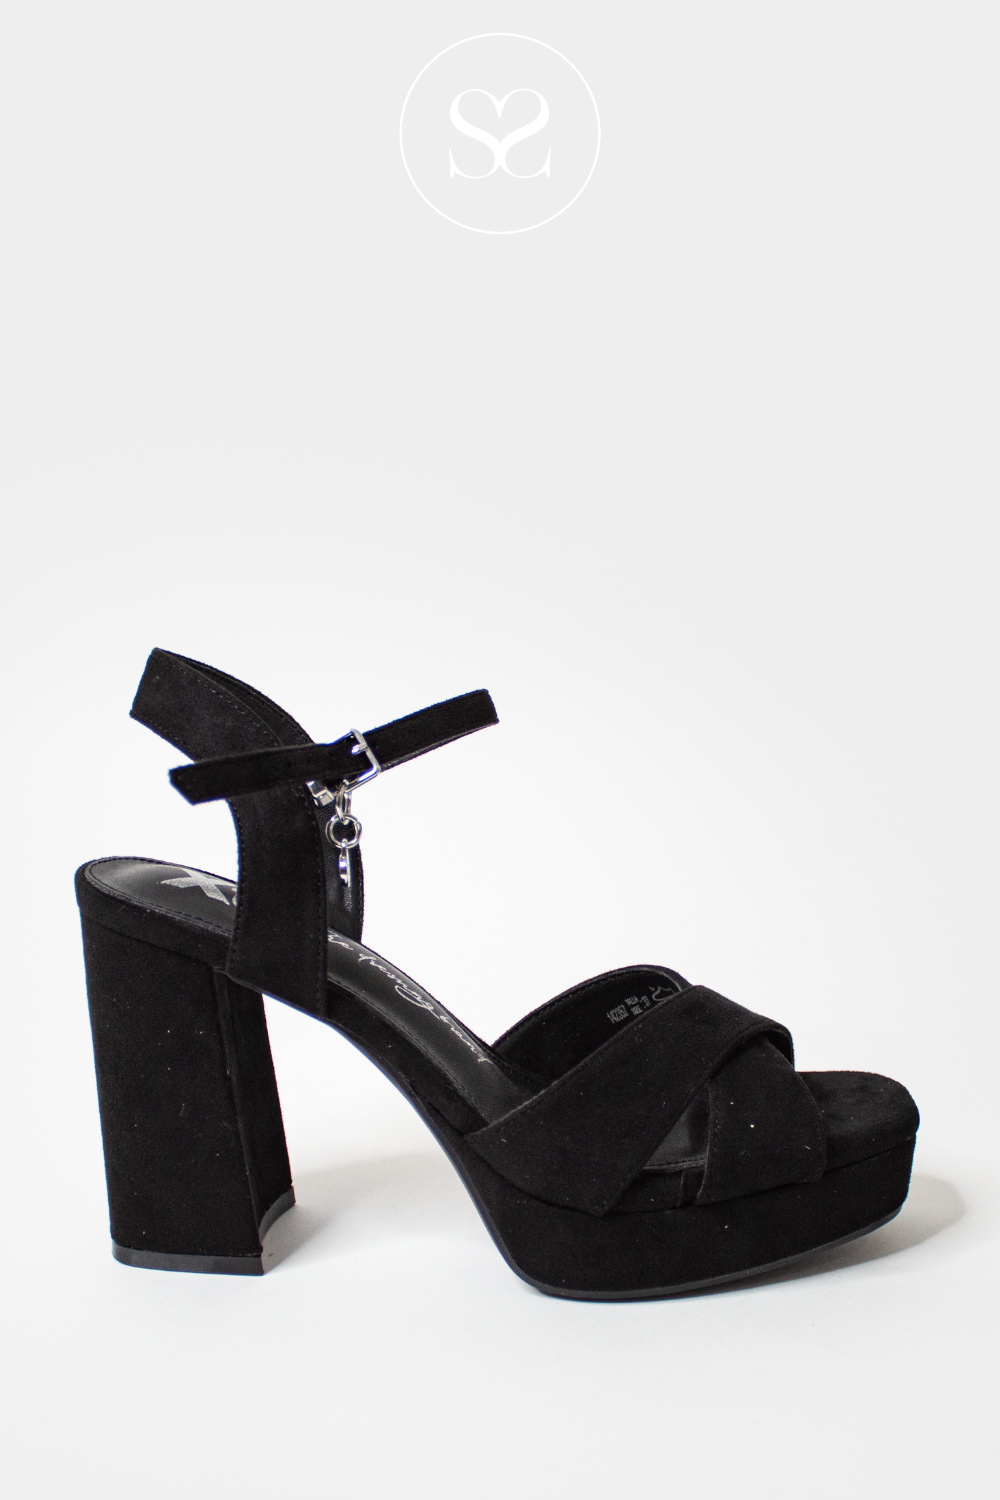 XTI 142357 BLACK PLATFORM BLOCK HEELS WITH CROSS STRAPS AND ADJUSTABLE ANKLE STRAP